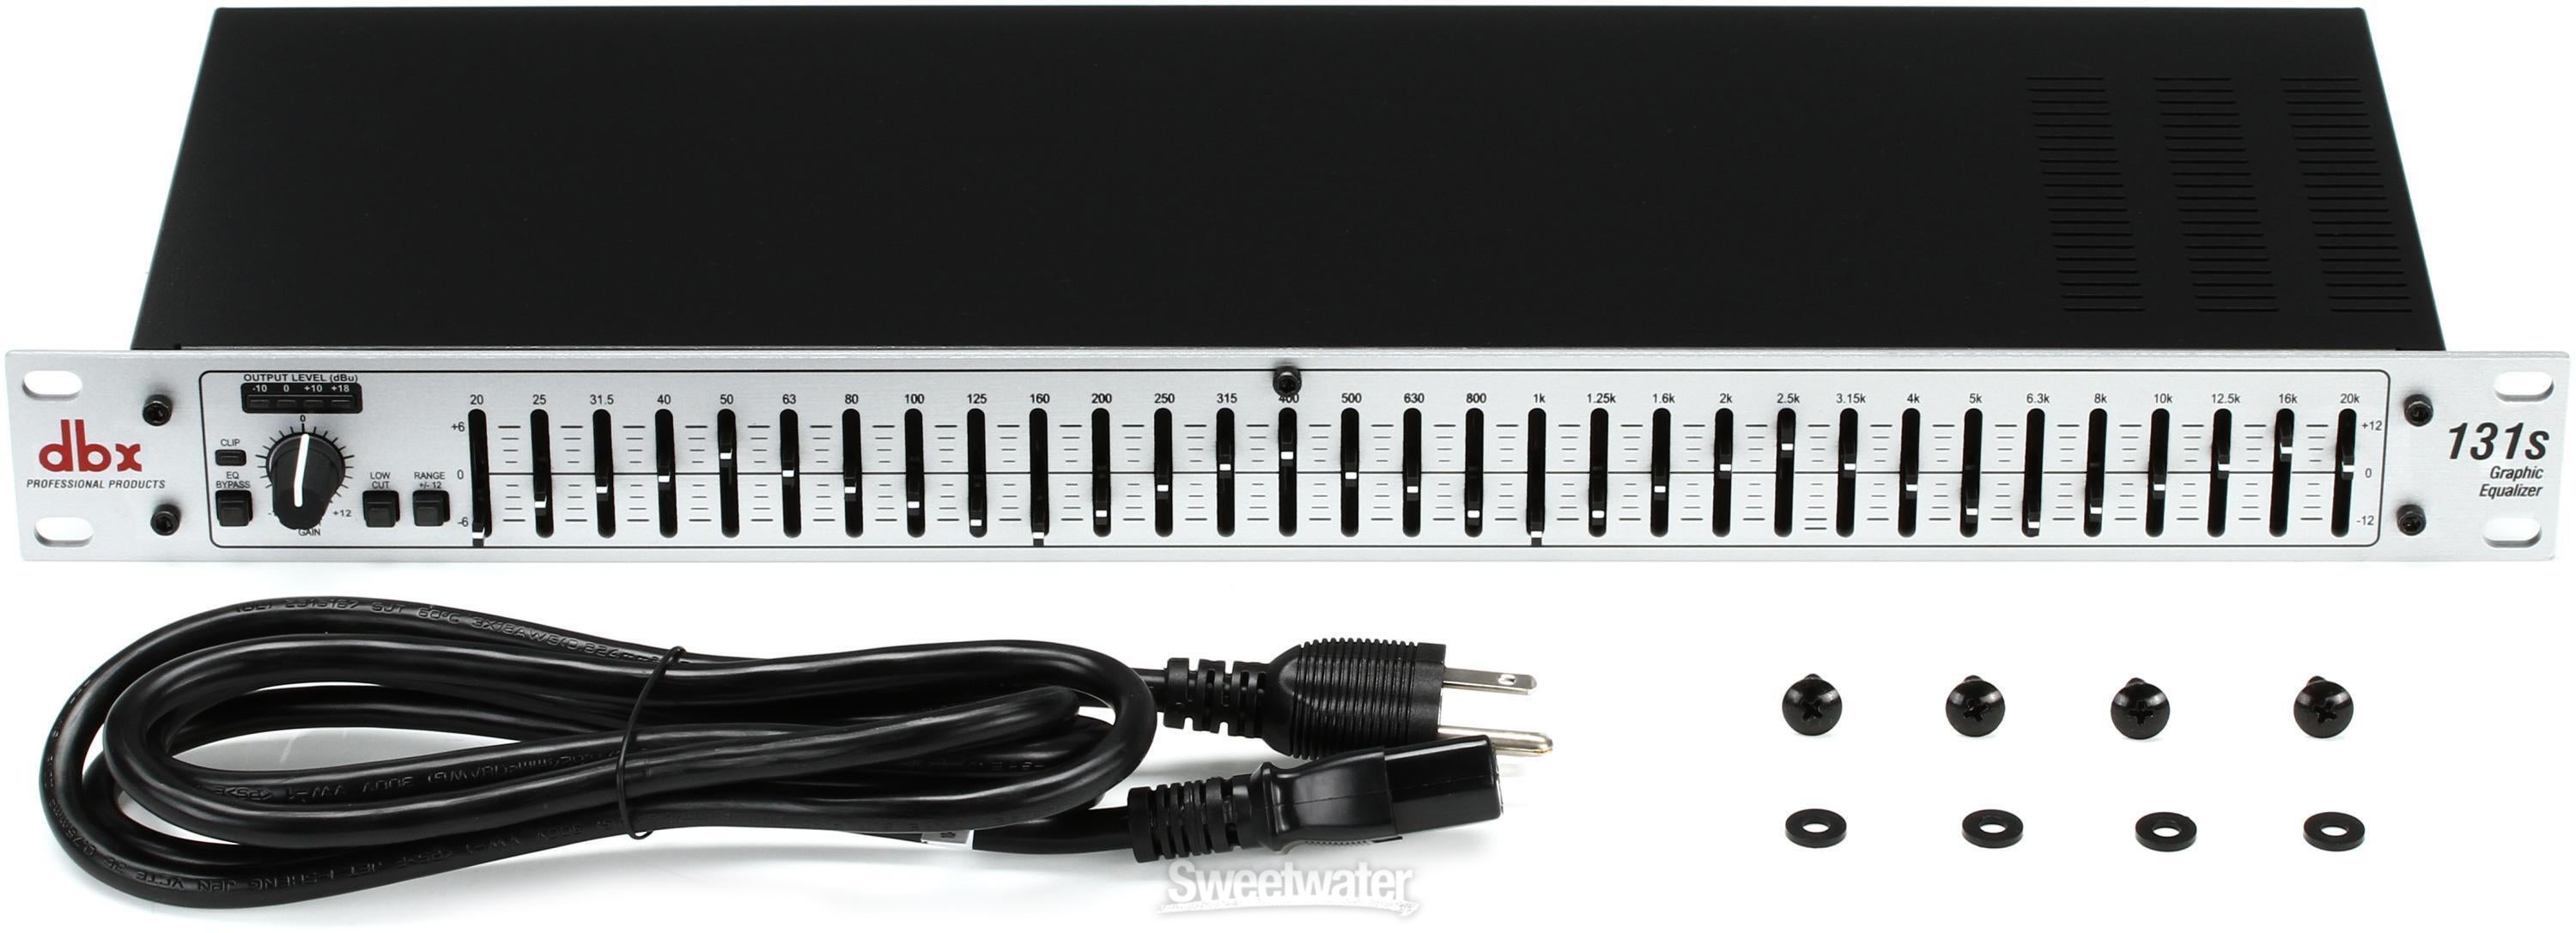 dbx 131s 31-band Graphic Equalizer